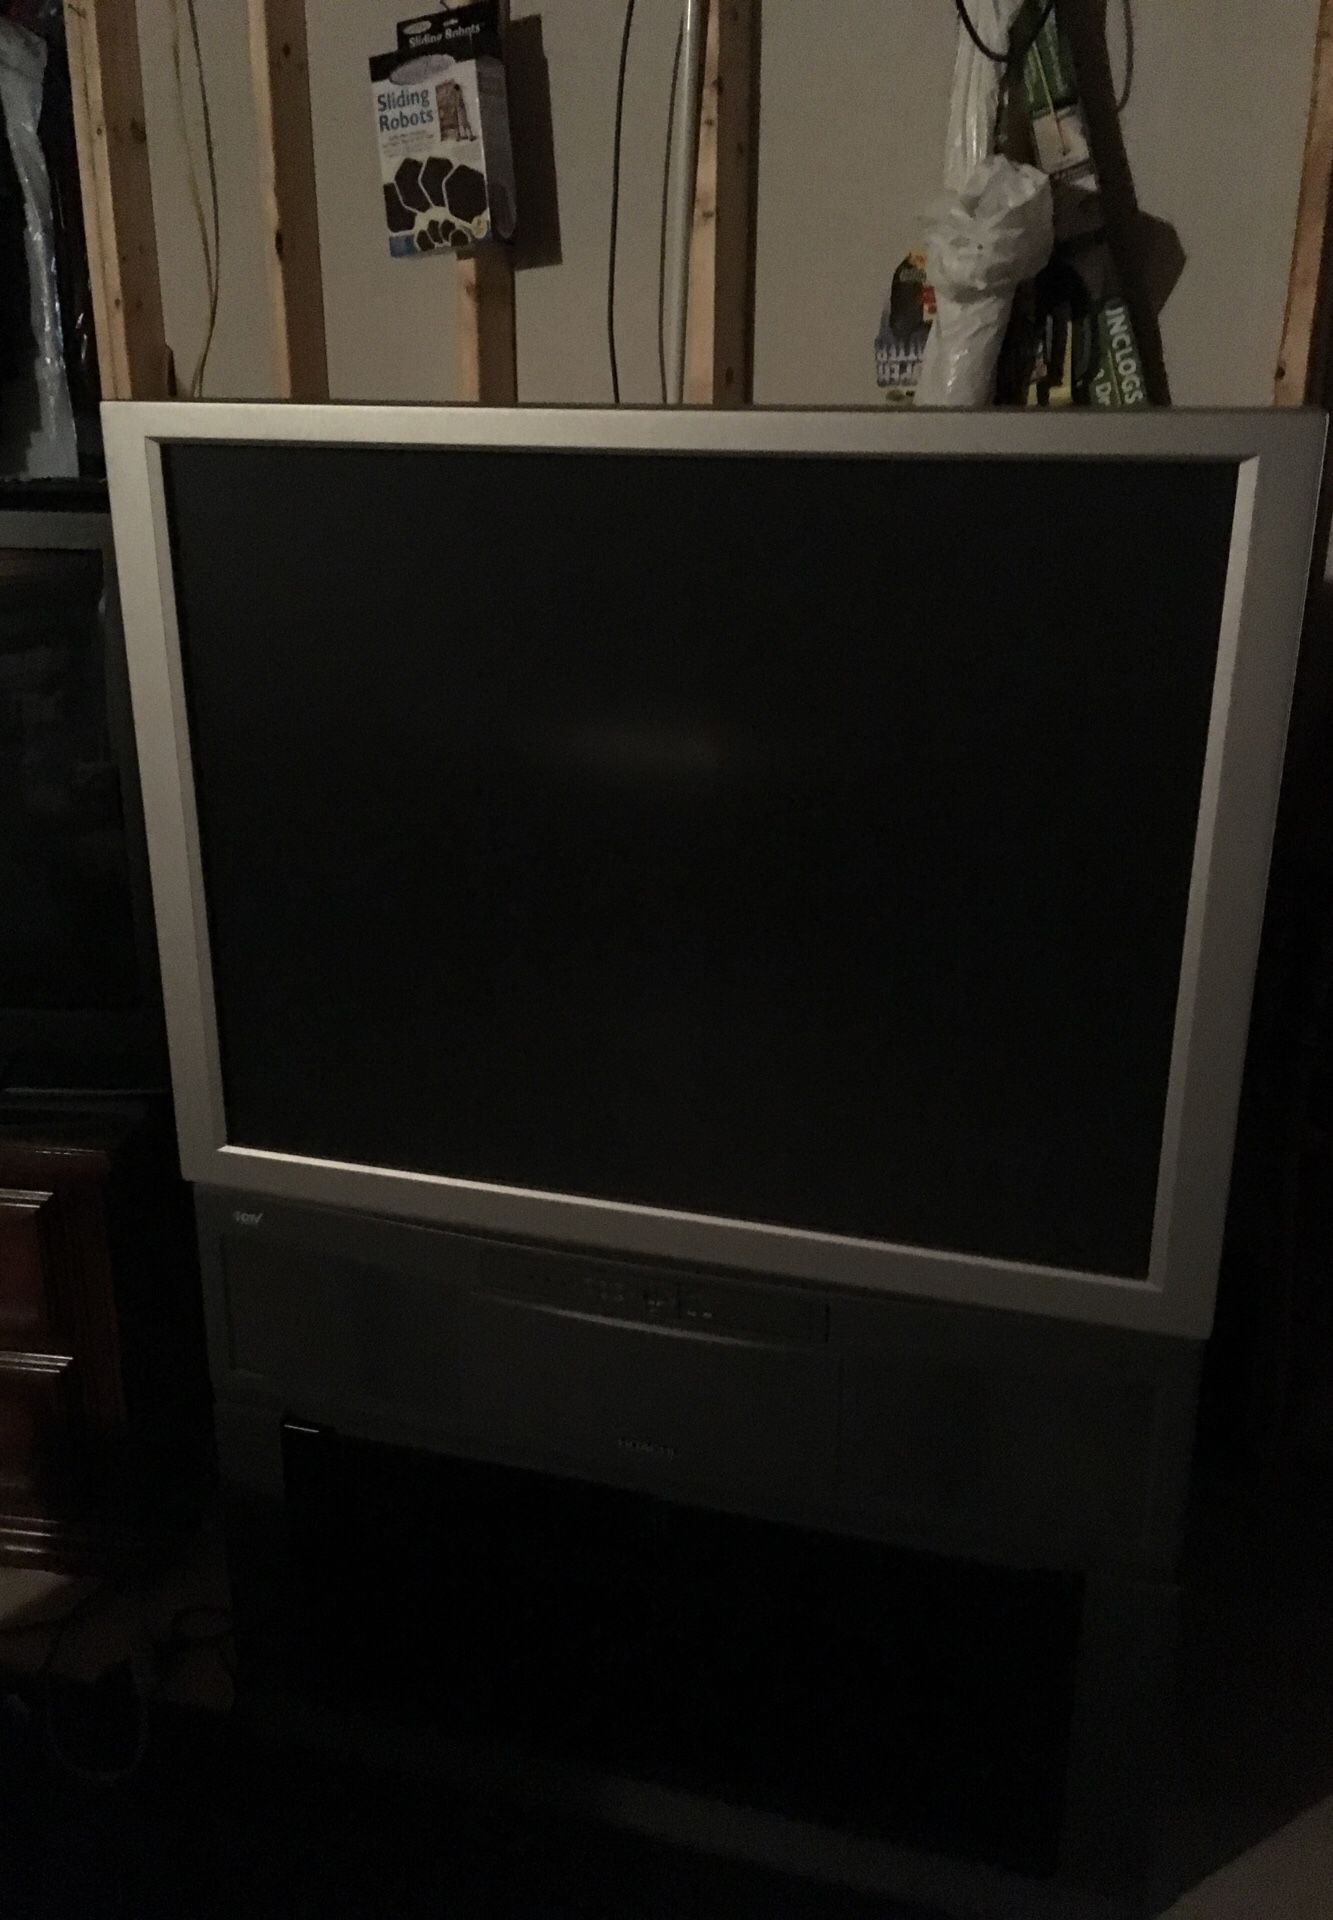 Hitachi 43 inch projection tv with custom stand that houses other electronics